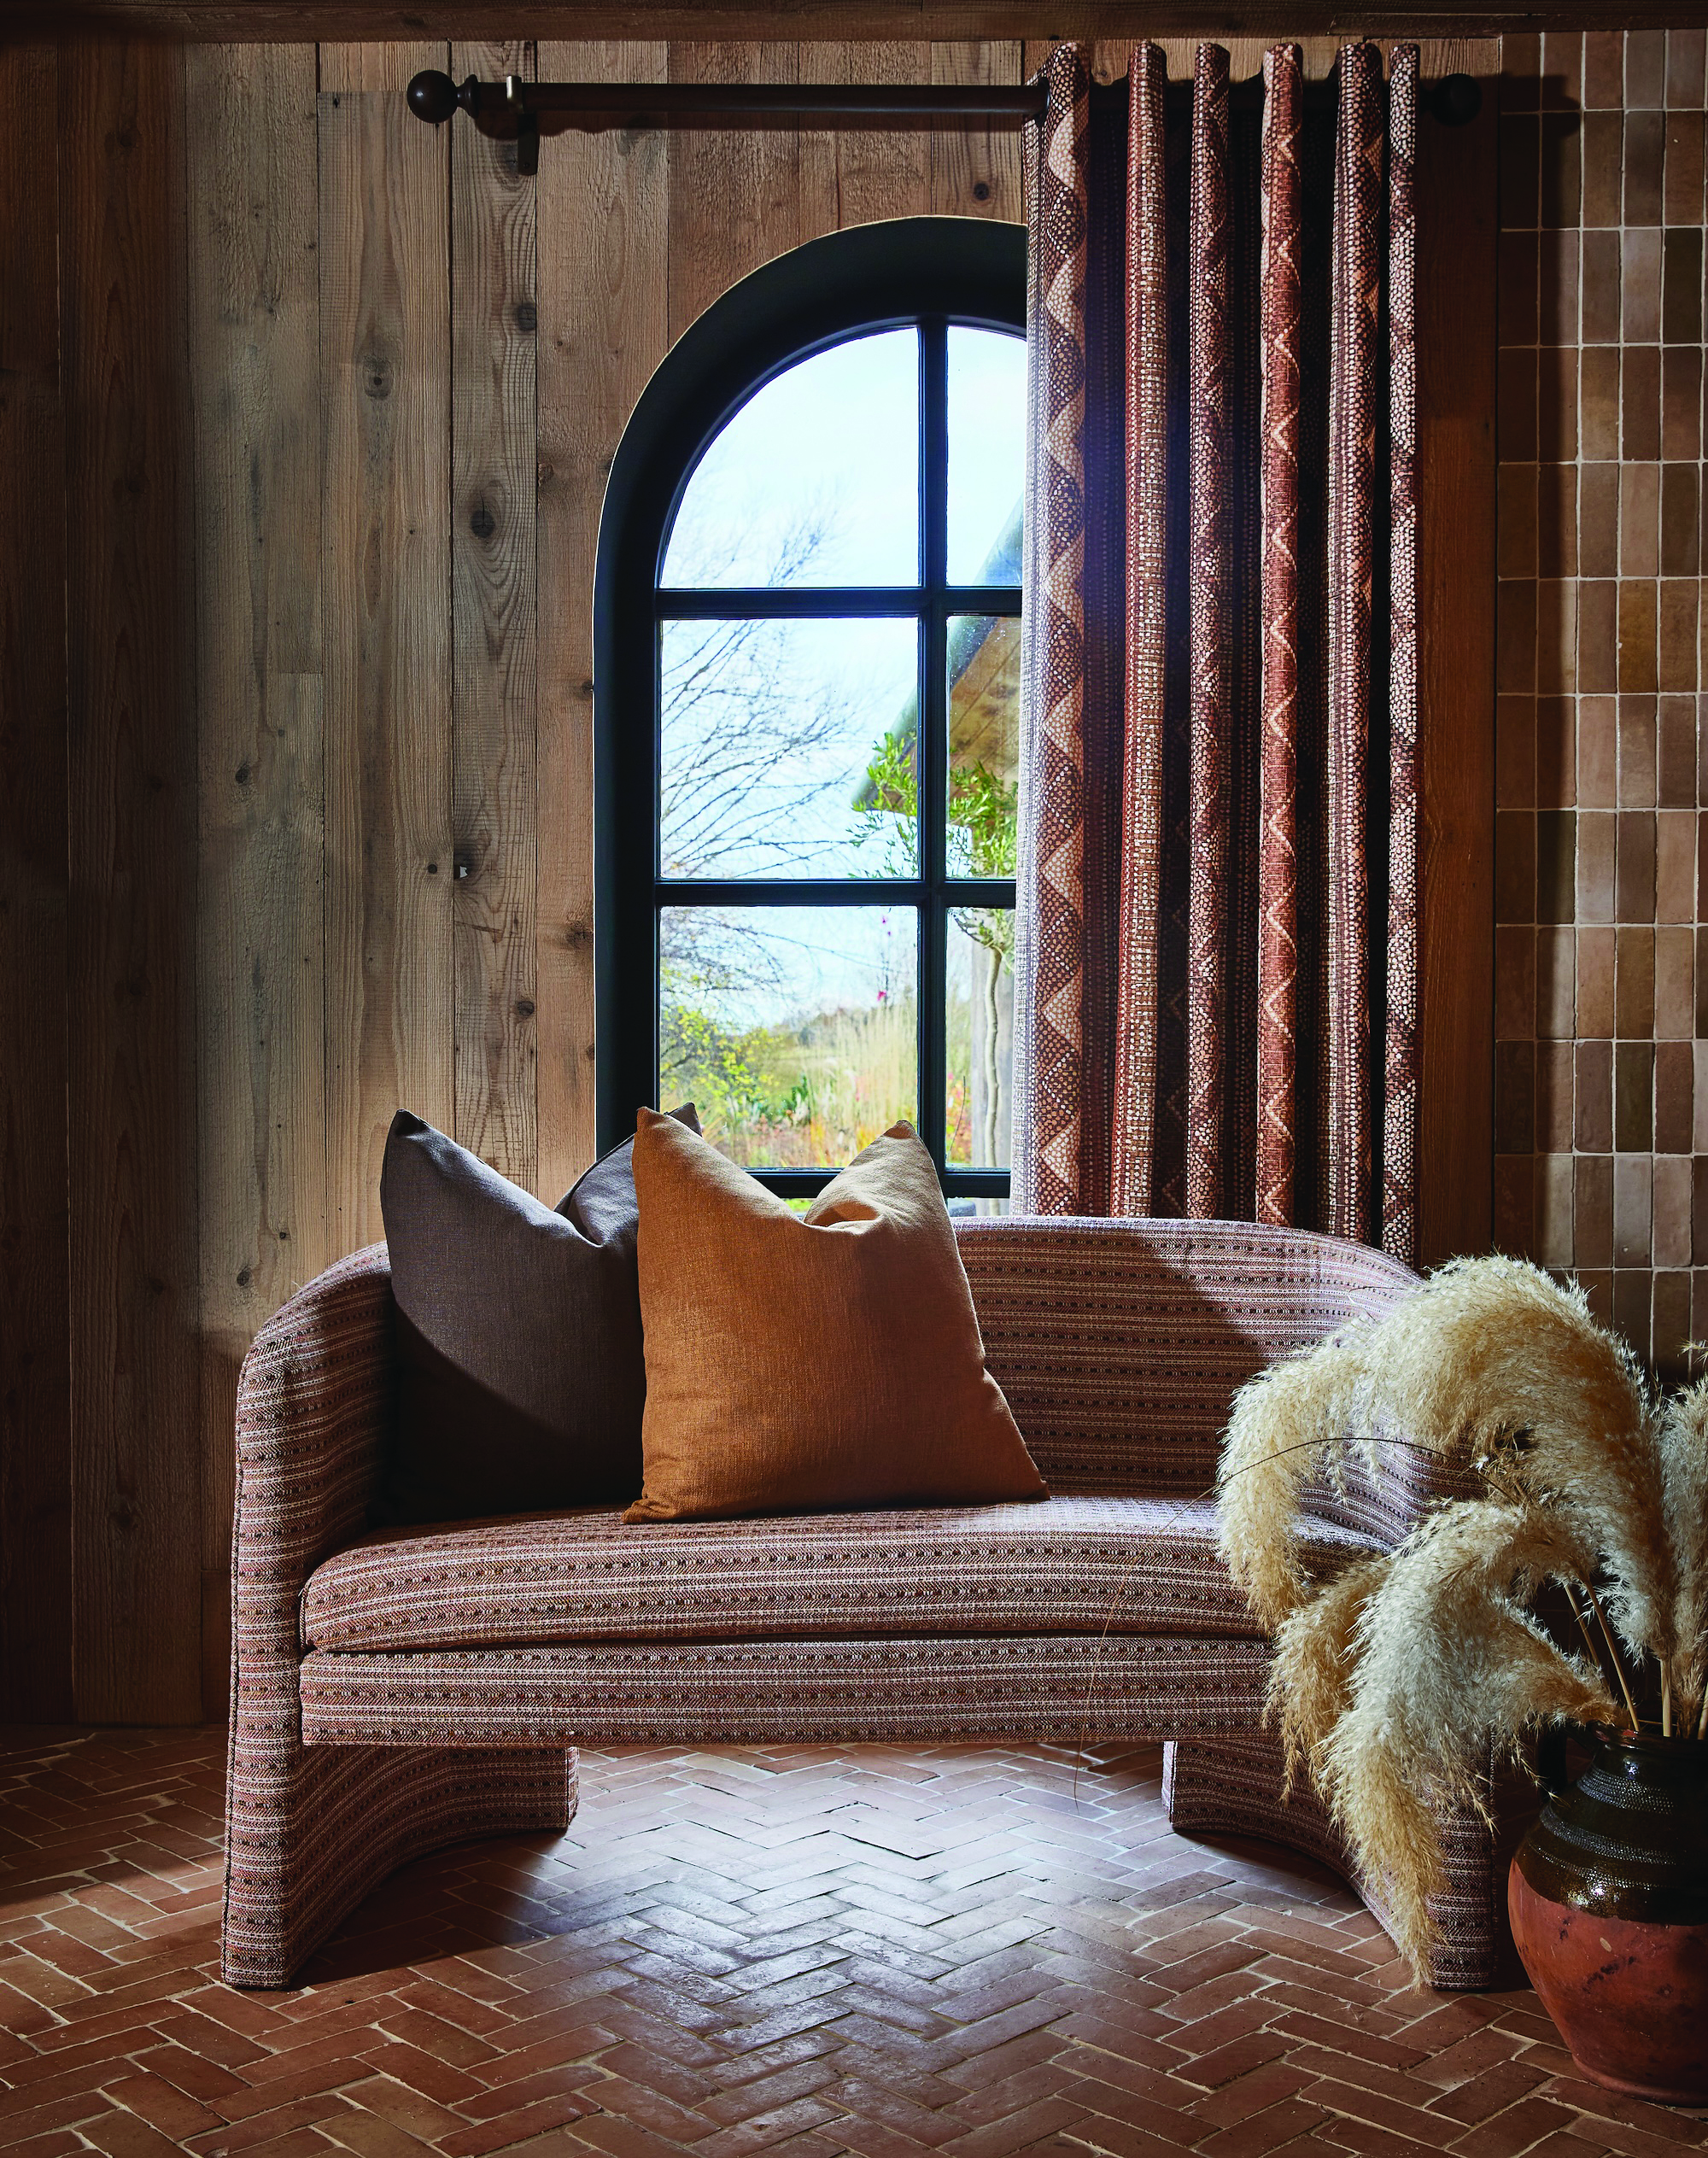 A living room in brown and orange tones with curtains and sofa